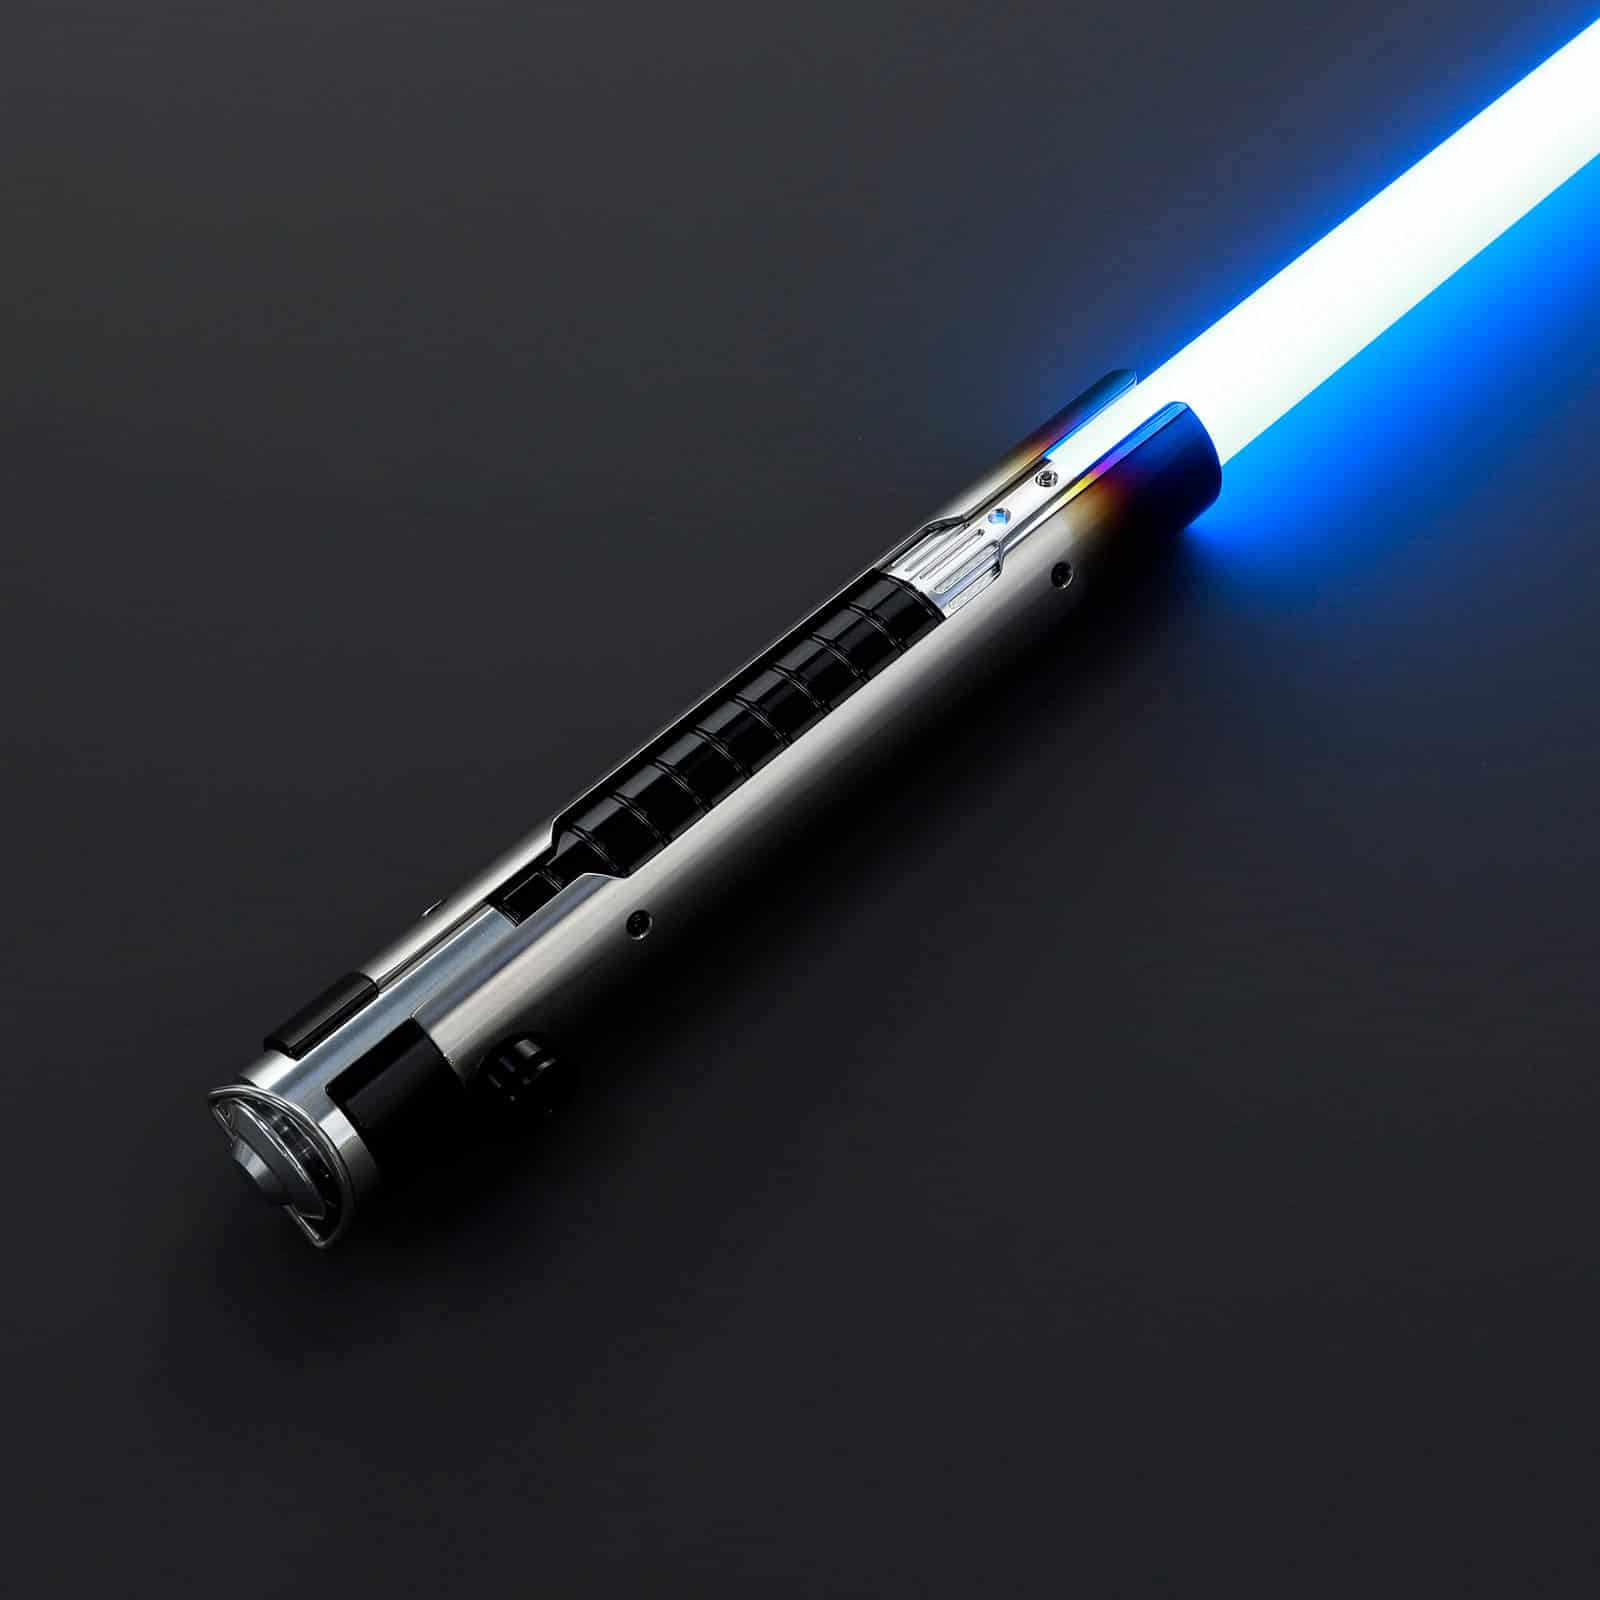 Jedi-Master-Sol-Lightsaber-From-The-Star-Wars-Acolyte-Series-1.jpg